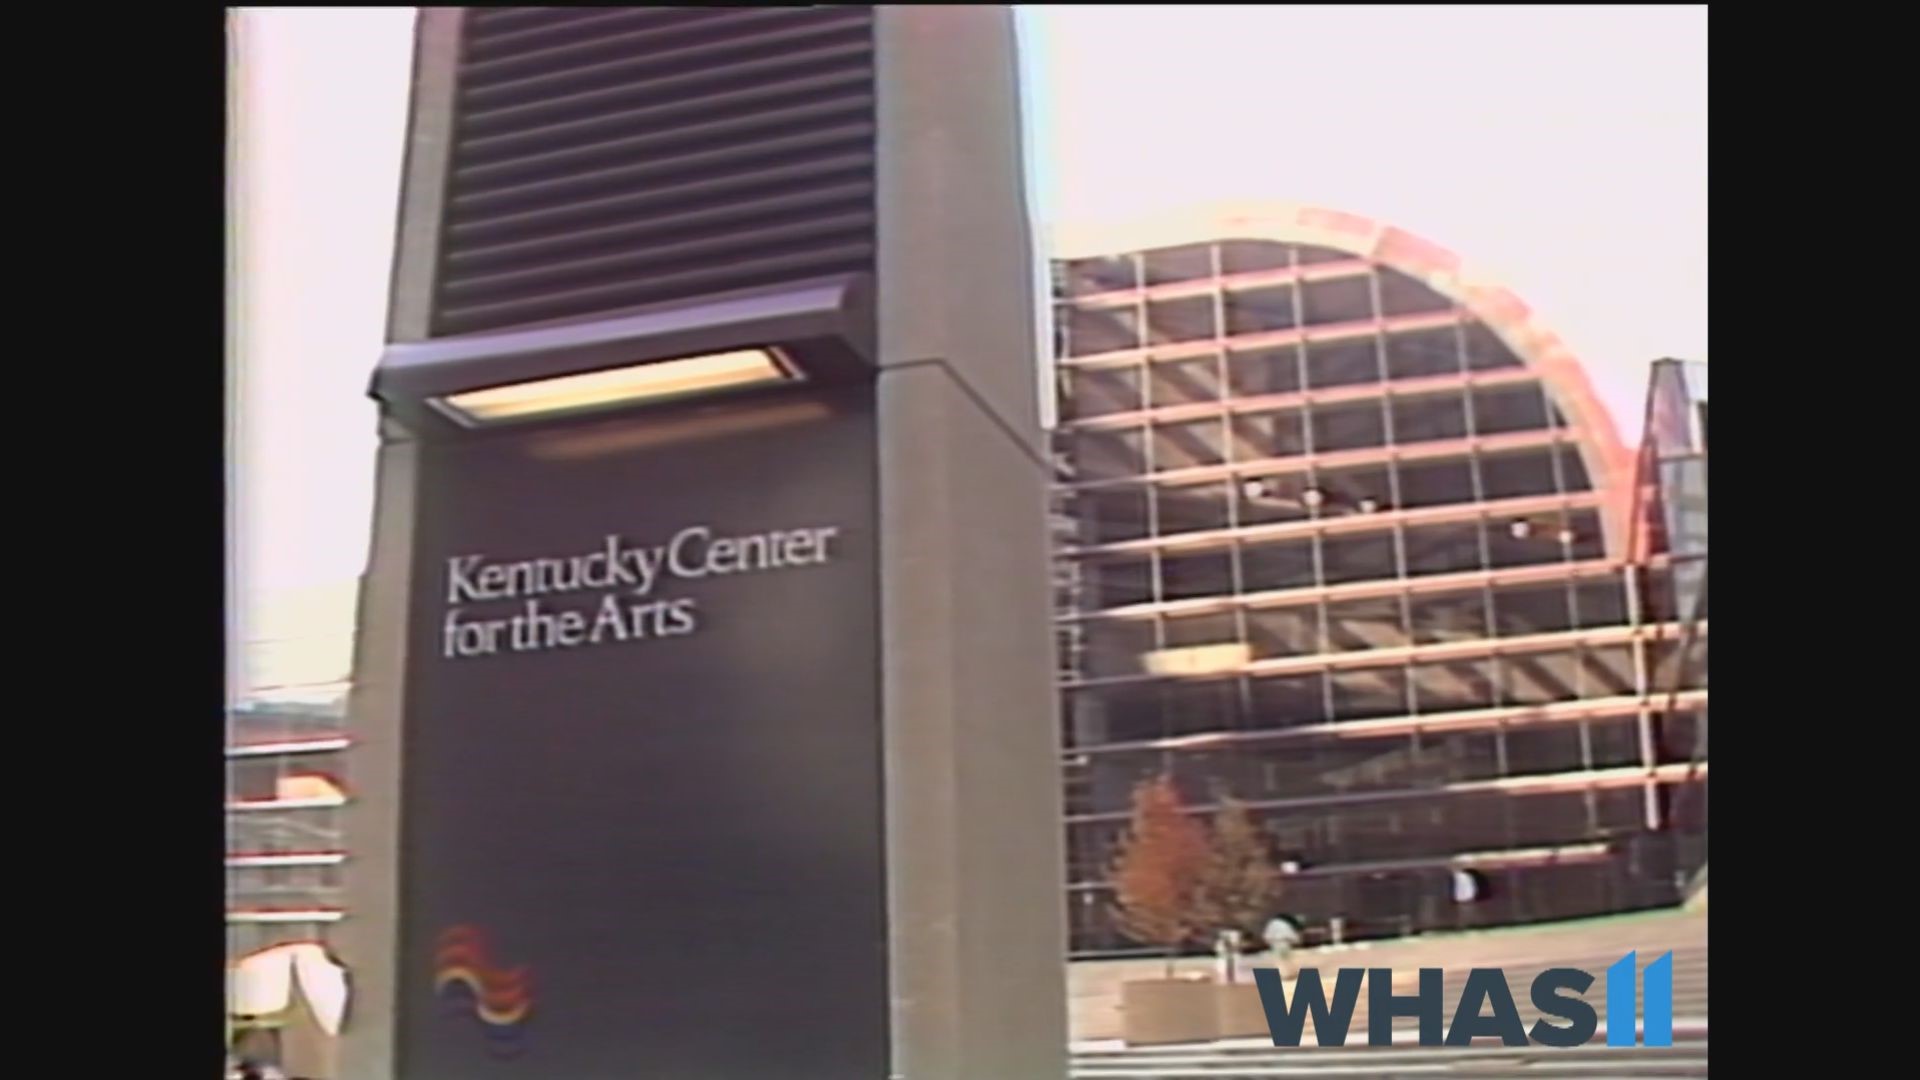 The Kentucky Center for the Arts opened with a gala event hosted by Oscar-winning film star Charlton Heston 40 years ago this month.